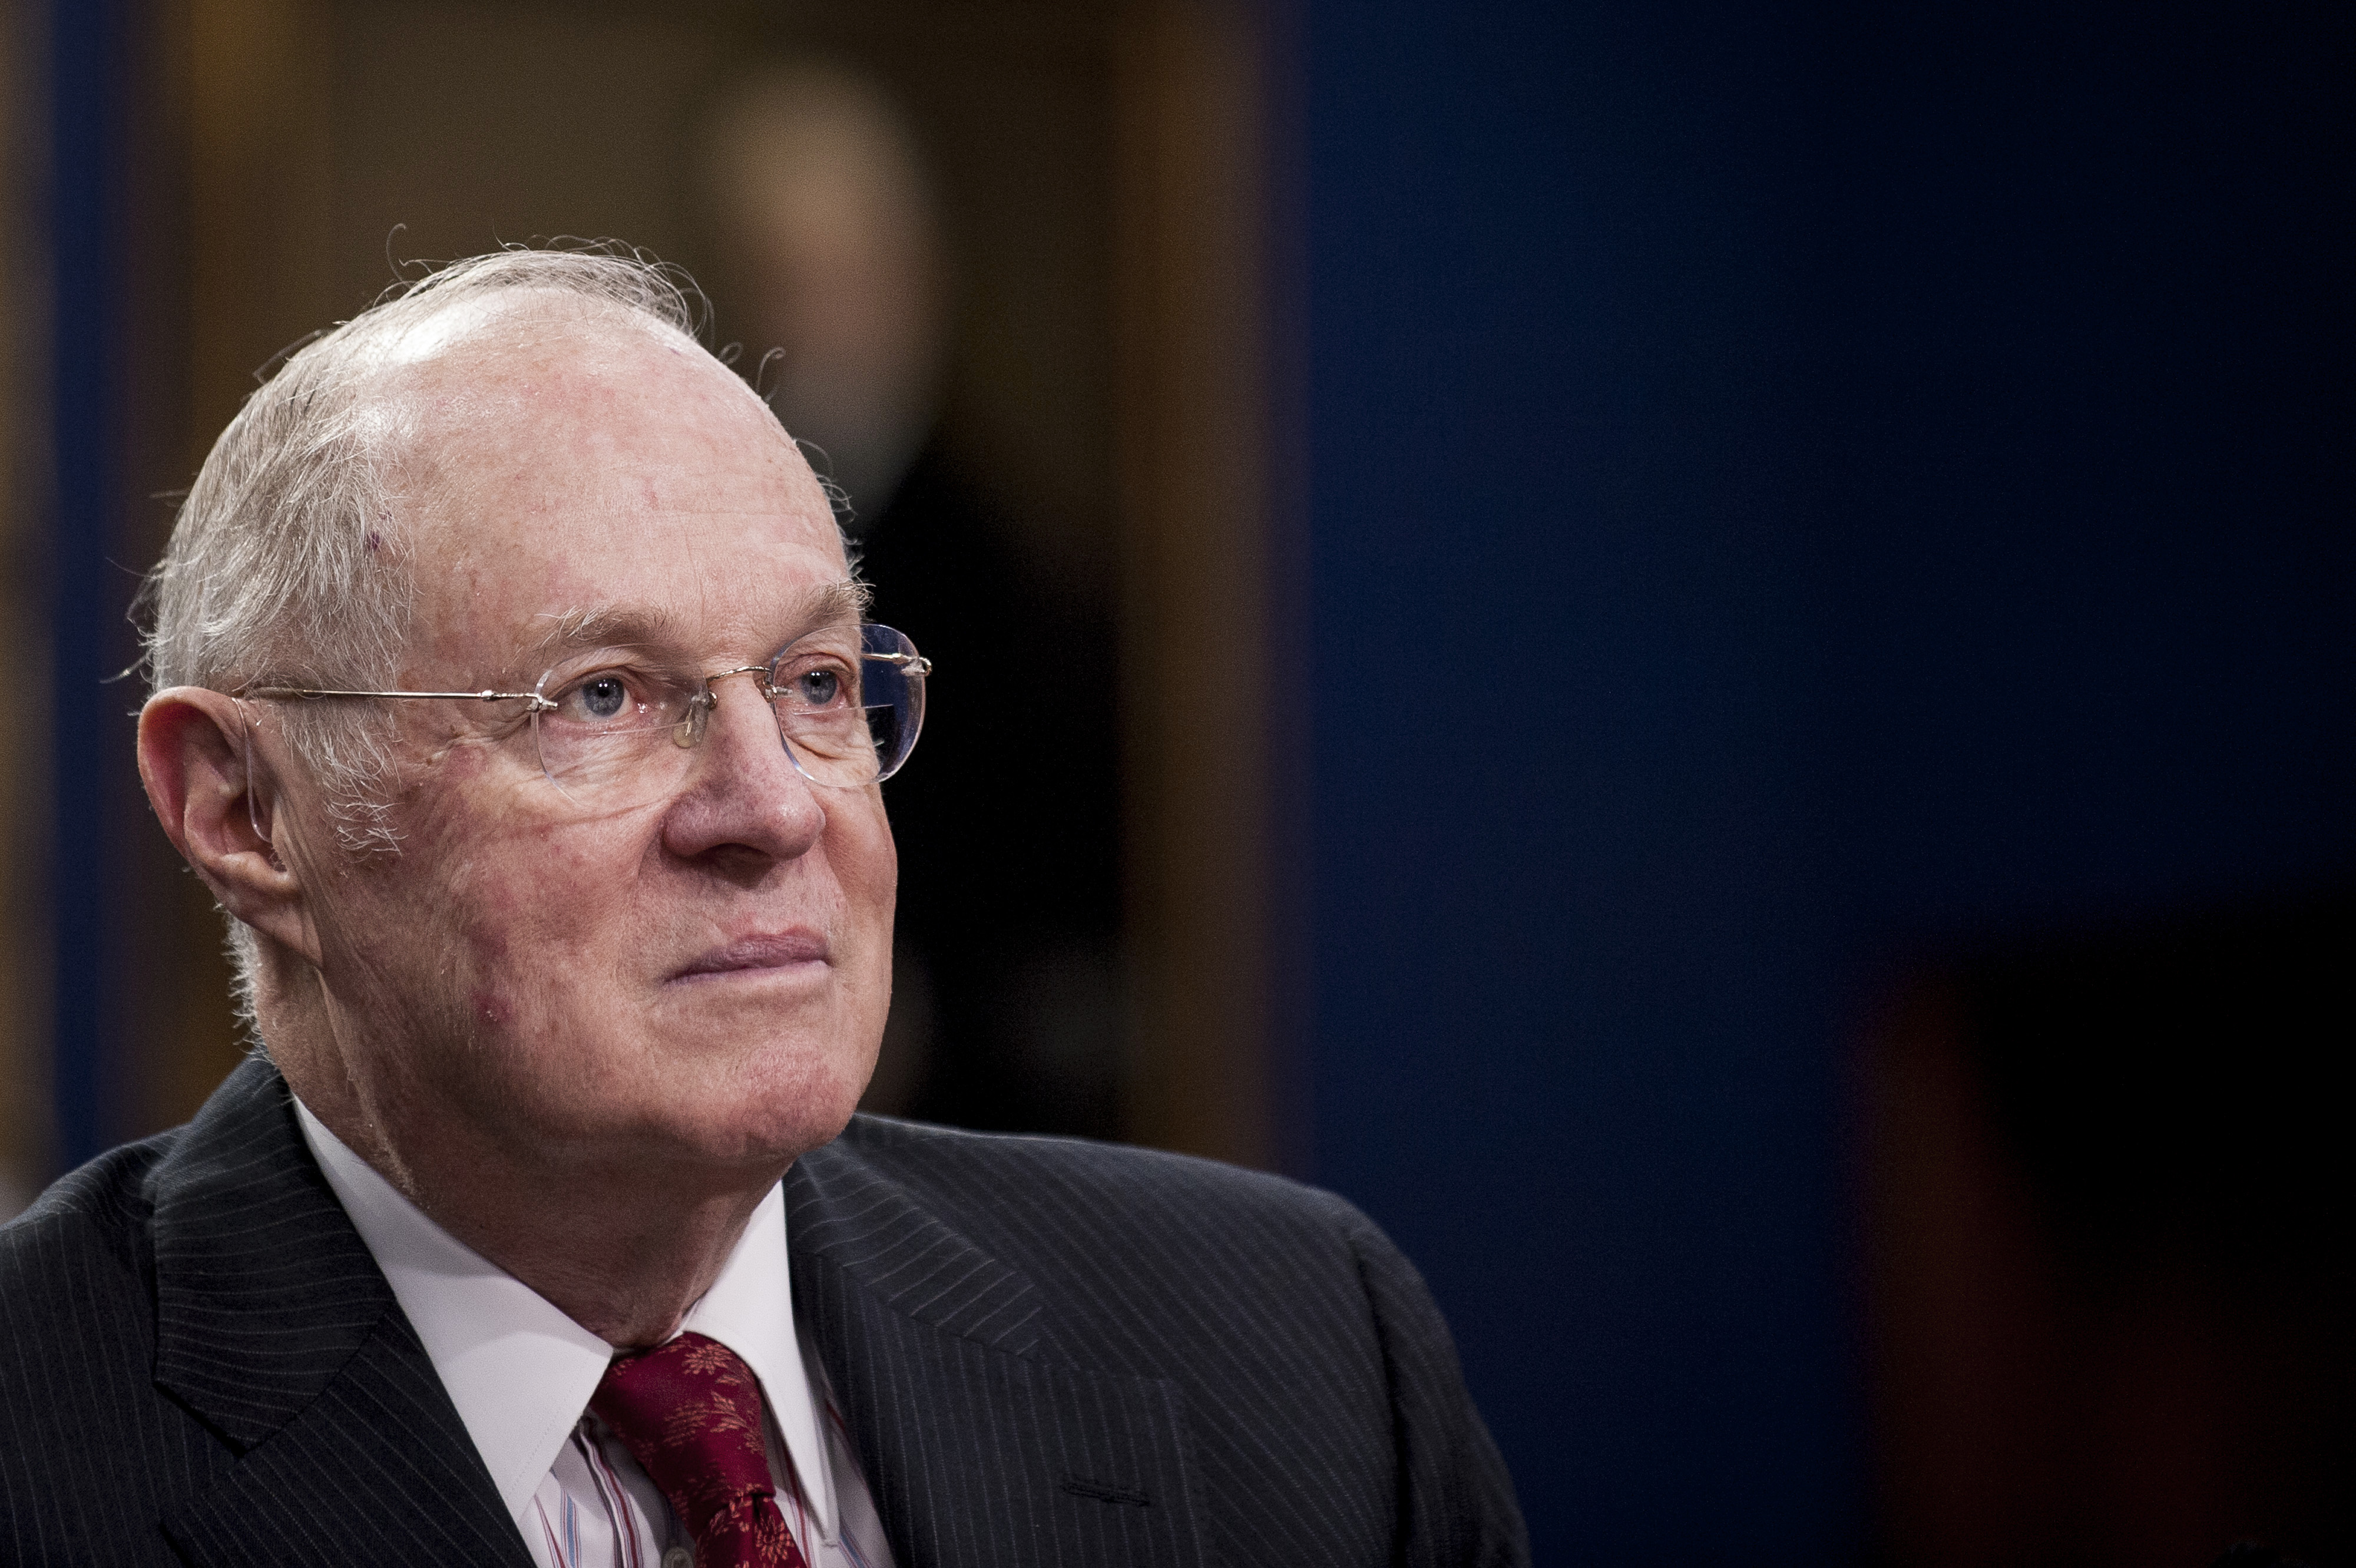 U.S. Supreme Court Justice Anthony Kennedy listens to opening statements during a Financial Services and General Government Subcommittee in Washington, D.C., U.S., on Monday, March 23, 2015. (Pete Marovich—Bloomberg / Getty Images)